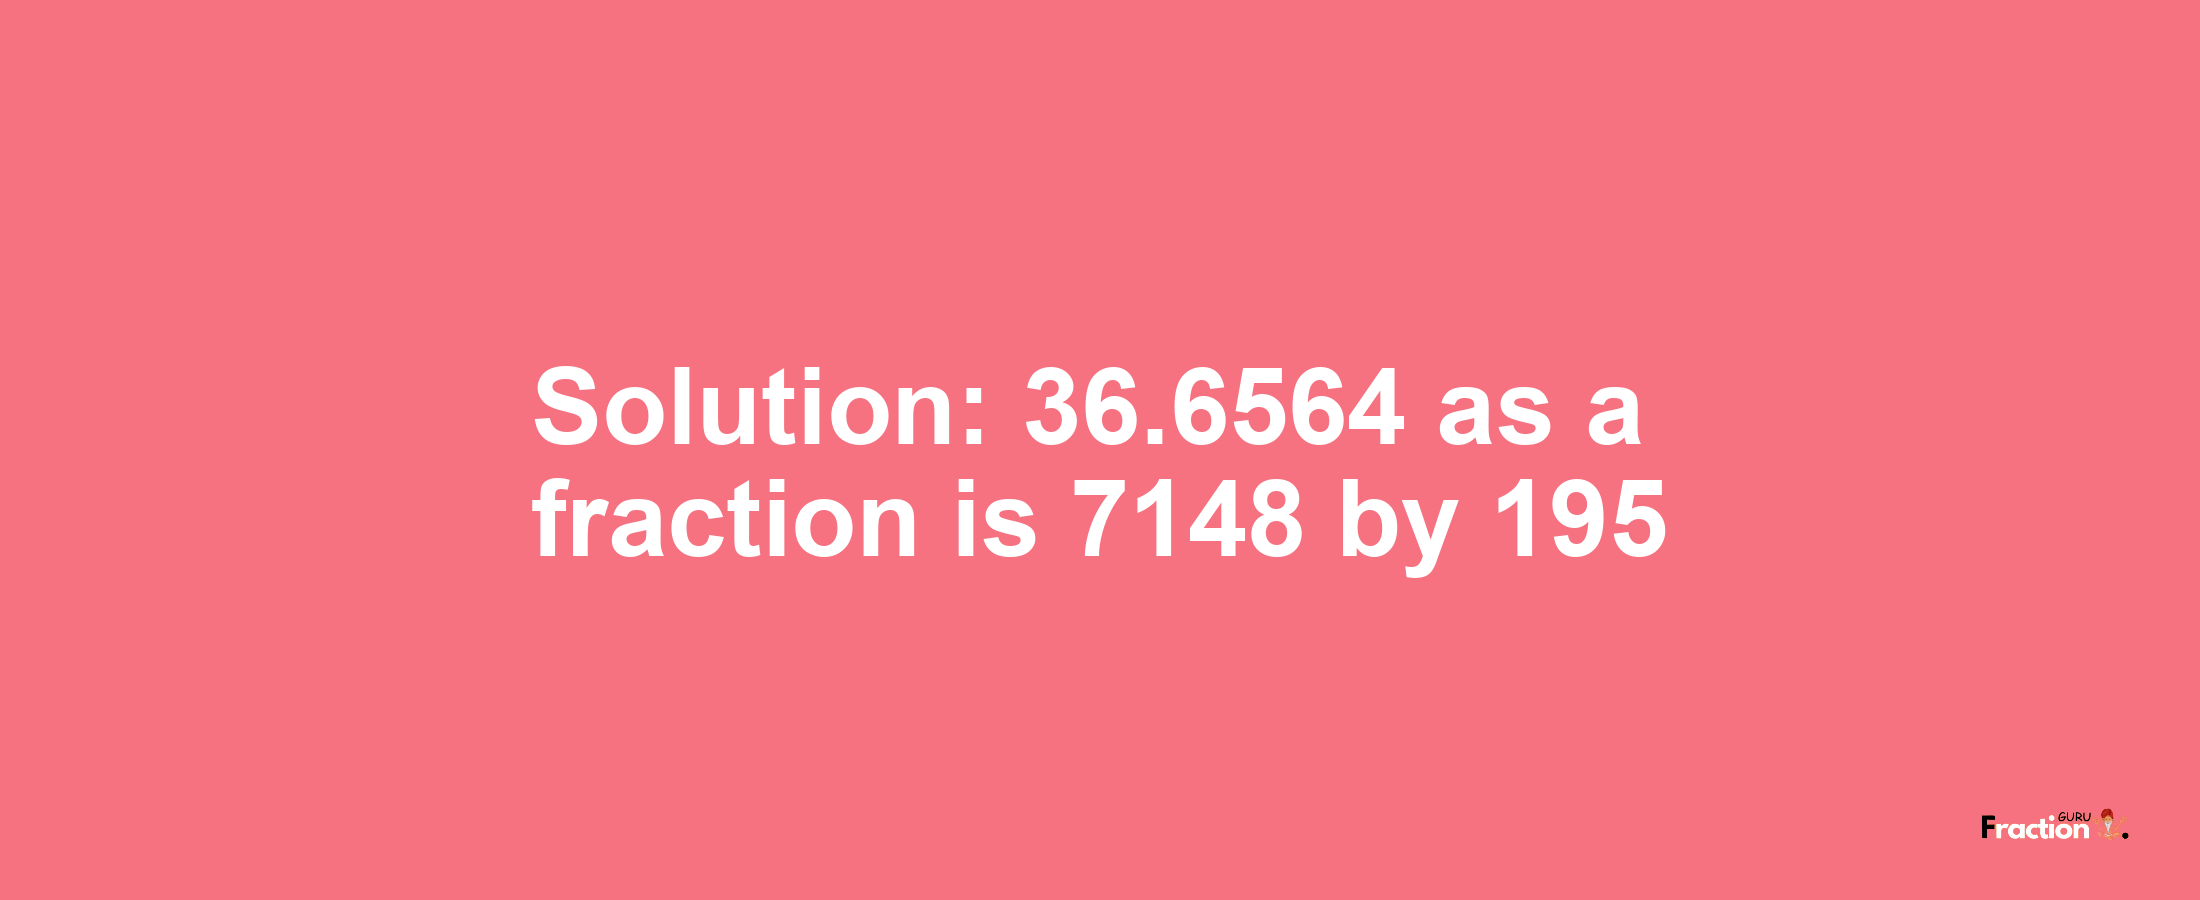 Solution:36.6564 as a fraction is 7148/195